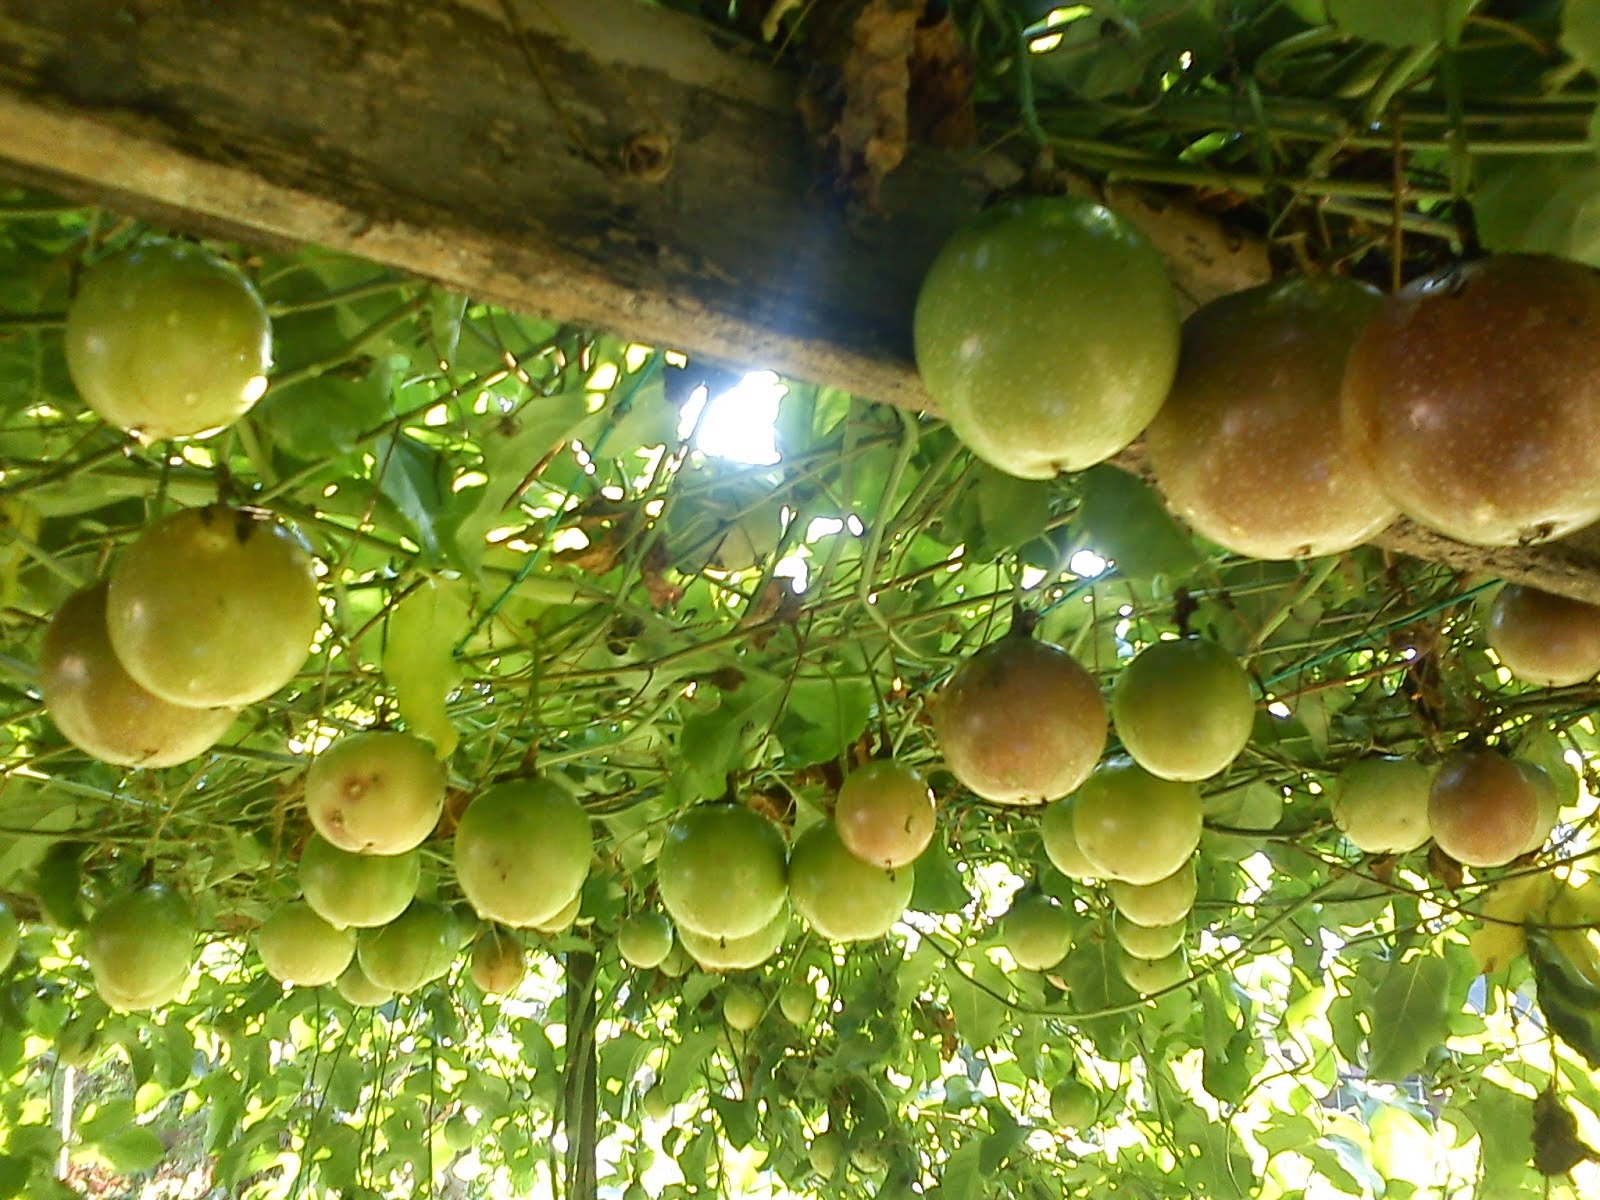 Fruit growing is. Markisa фрукт. Passion Fruit Tree. Dorium passion Fruit. Passion Fruit Mushroom Corall.